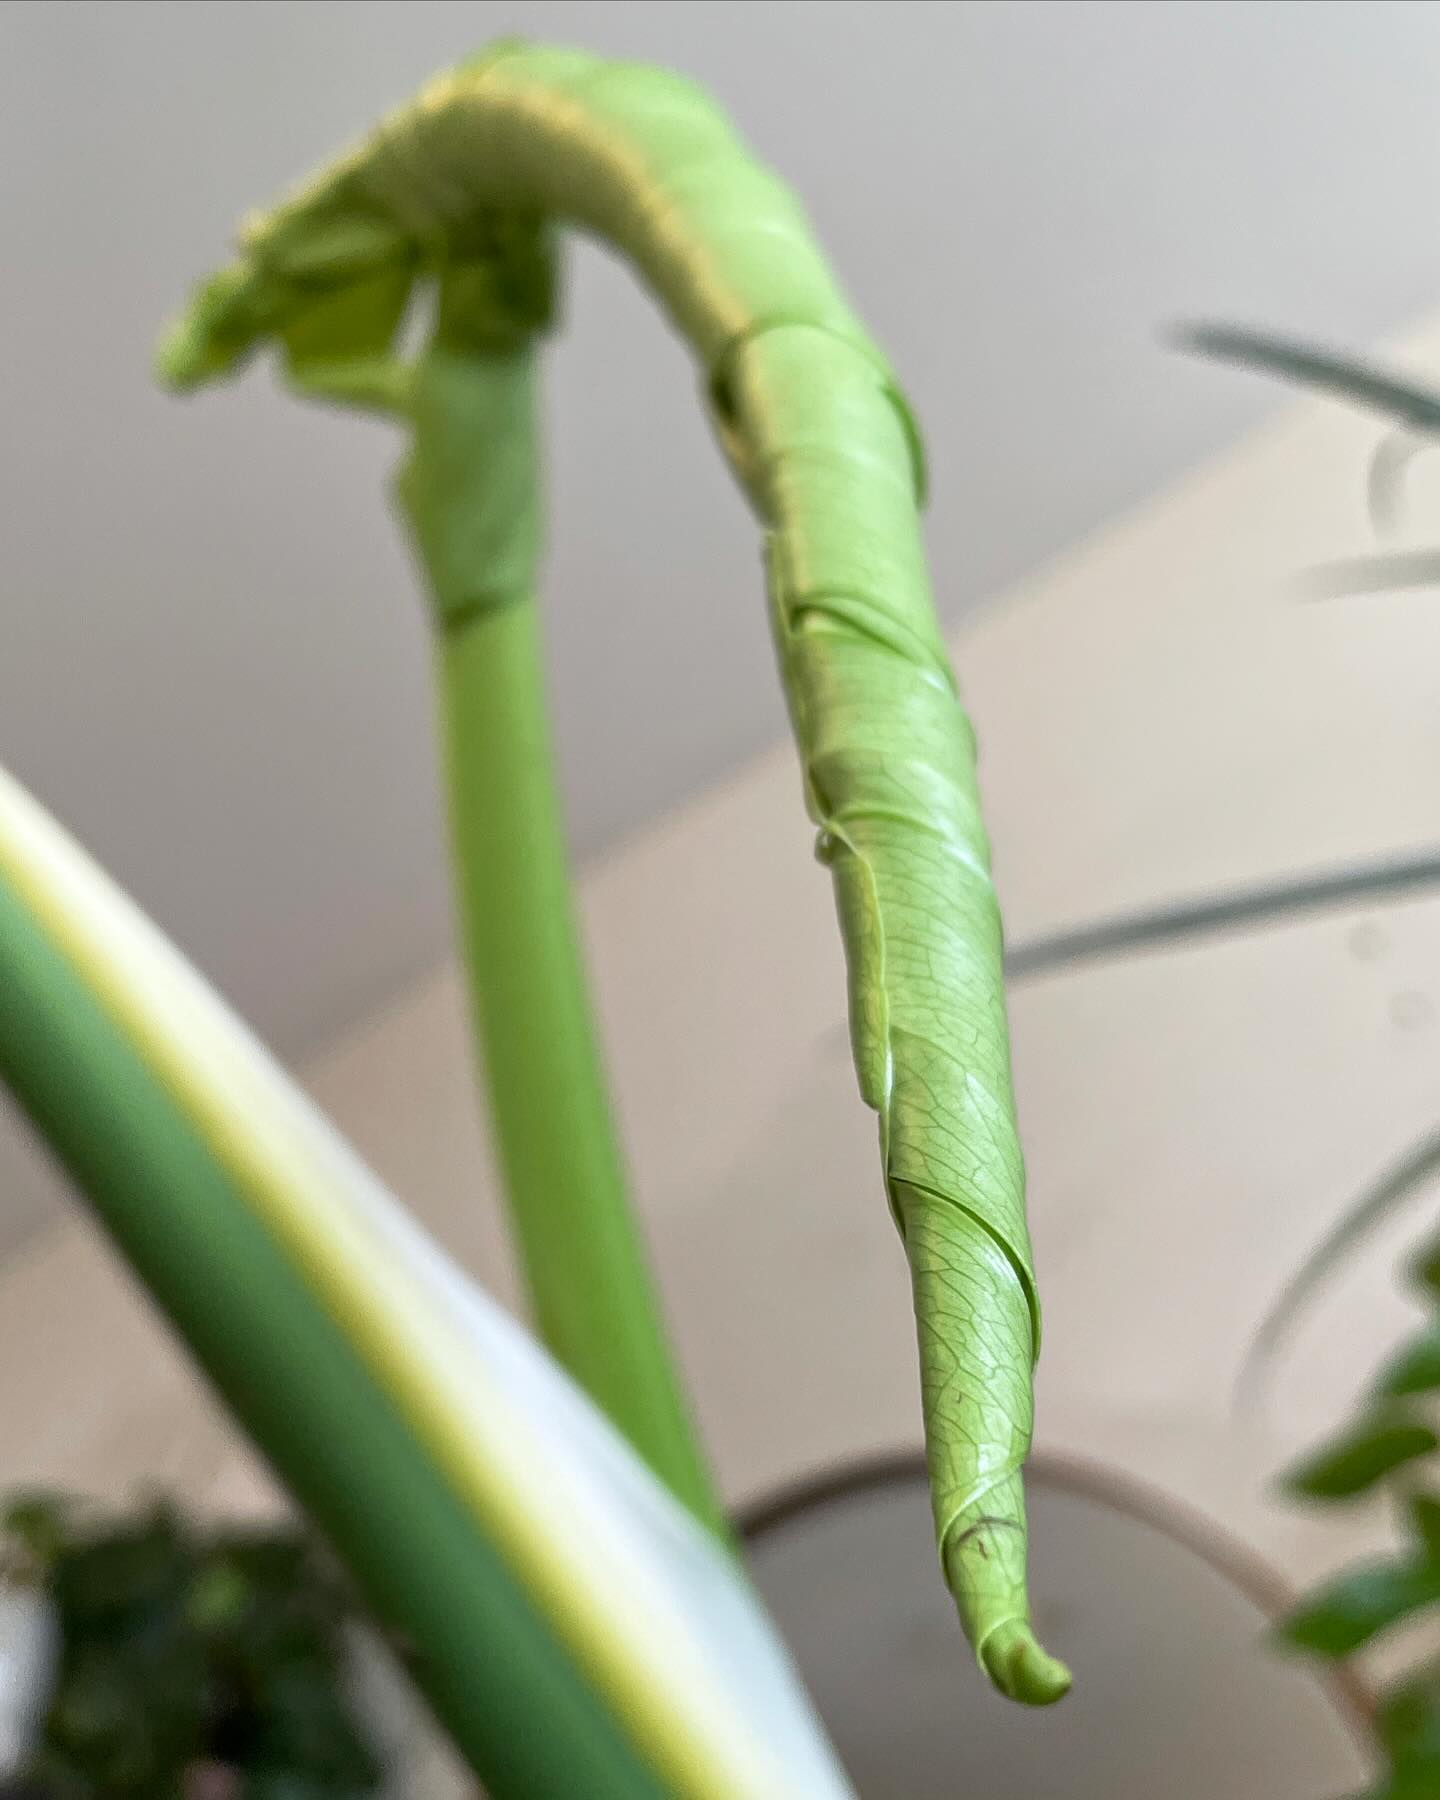 Monsterisha Del Monday 💅🌿 

Here are some gratuitous #NewLeaf shots from Big Mom #MonsteraDeliciosa because this stage of the unfurling is always so coooool 🥹

Keep going. Keep growing. 🤘🤘🤘